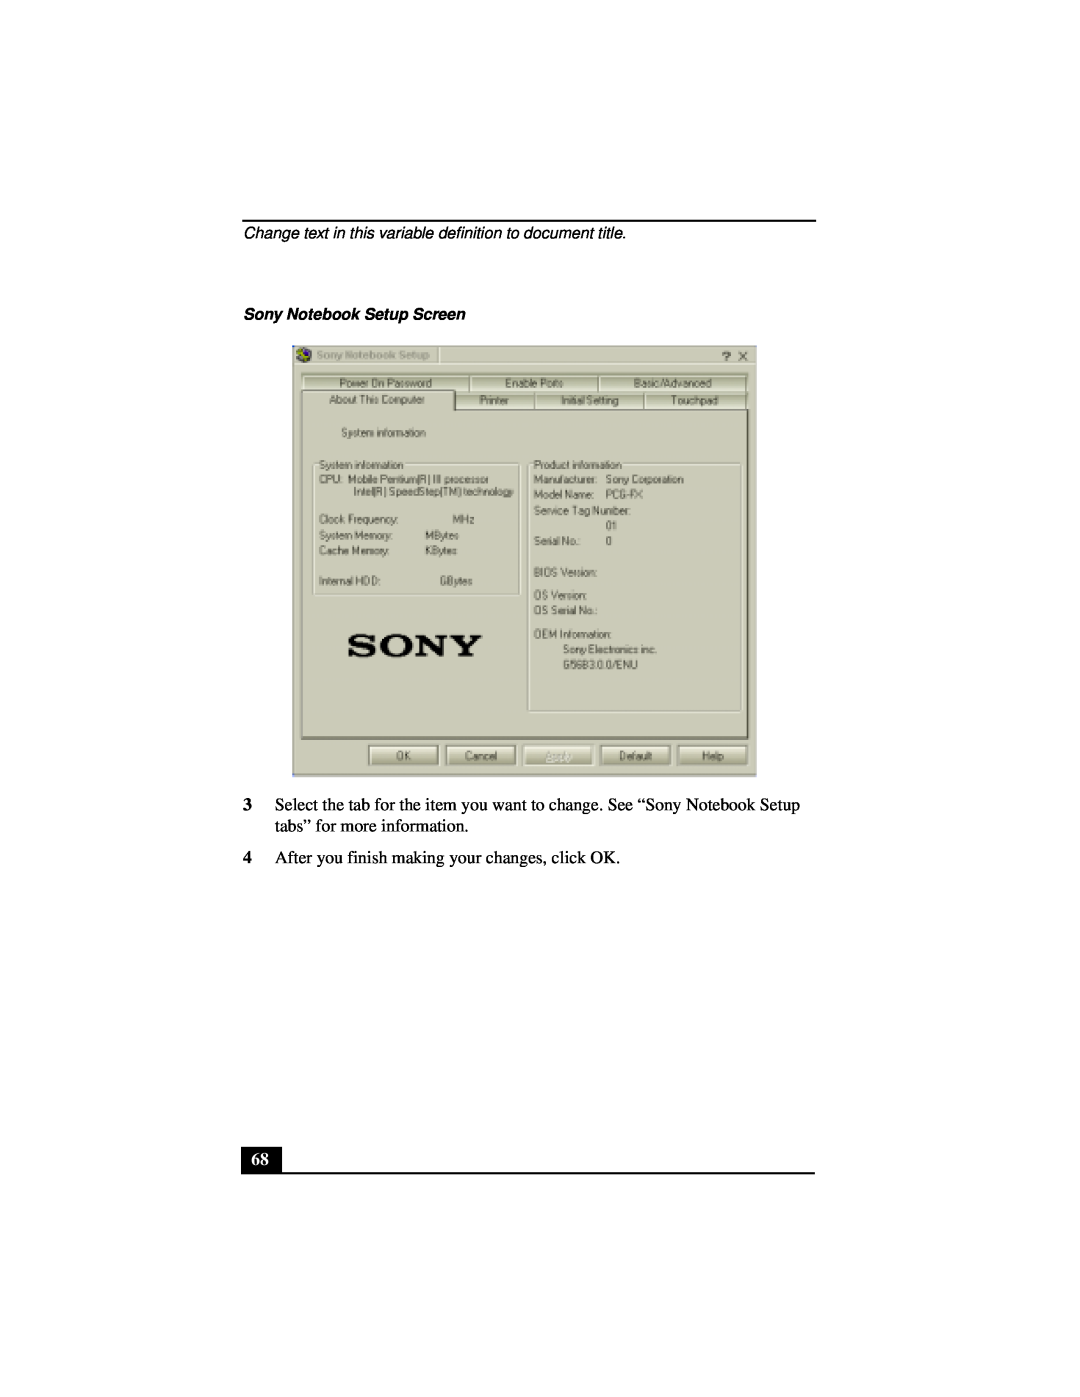 Sony Notebook Computer manual After you finish making your changes, click OK, Sony Notebook Setup Screen 